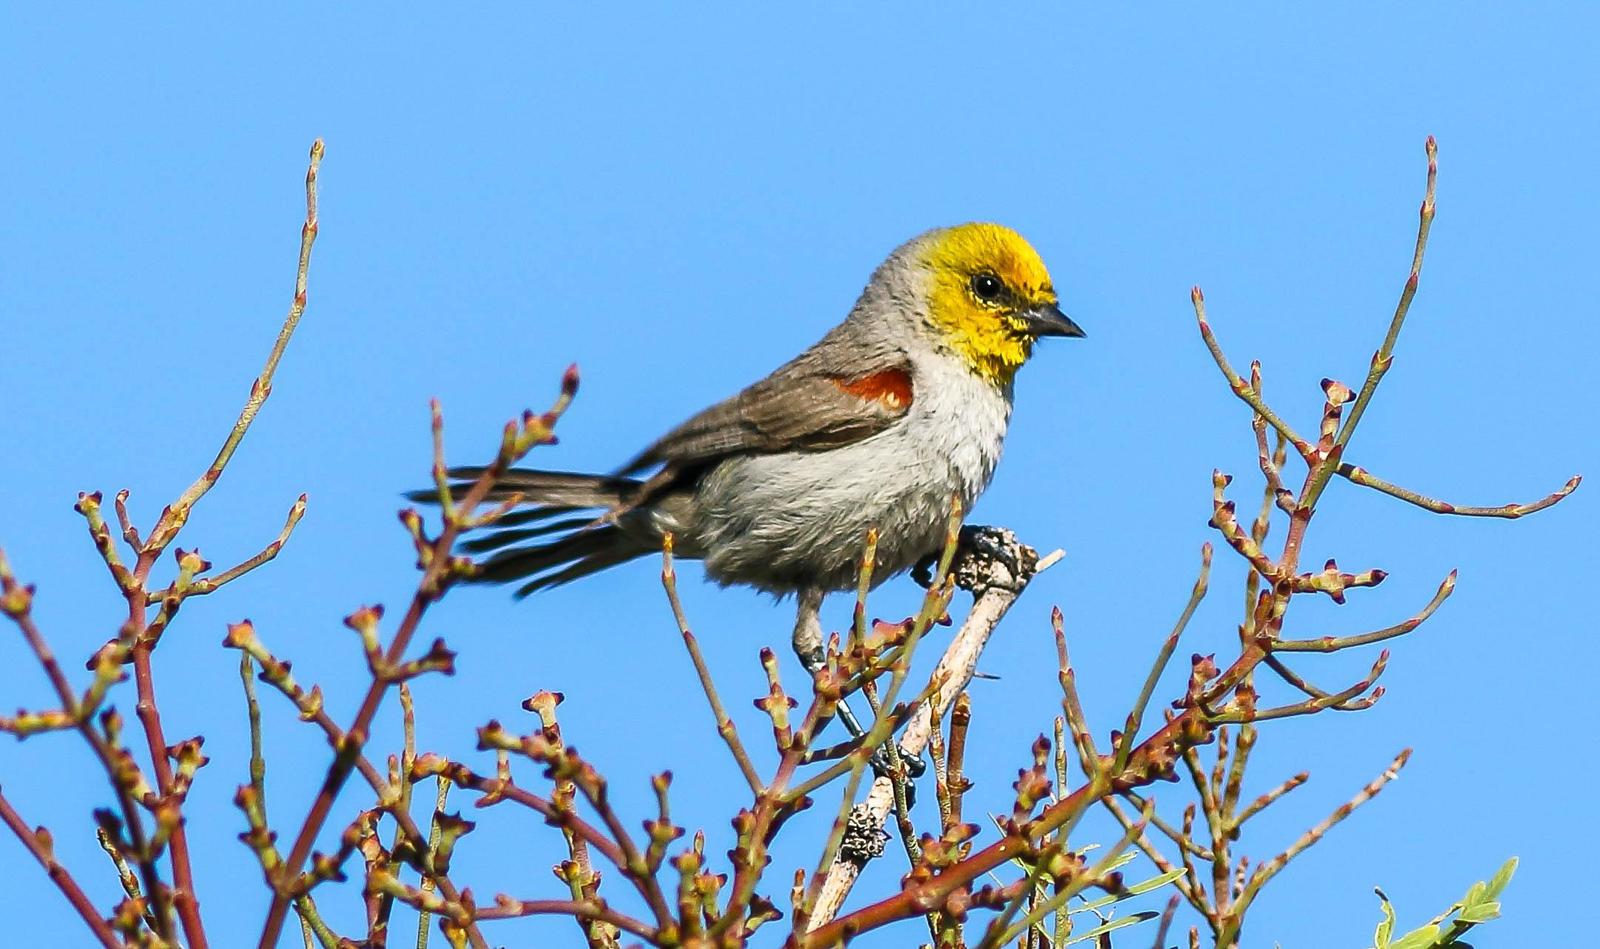 Verdin Photo by Terry Campbell